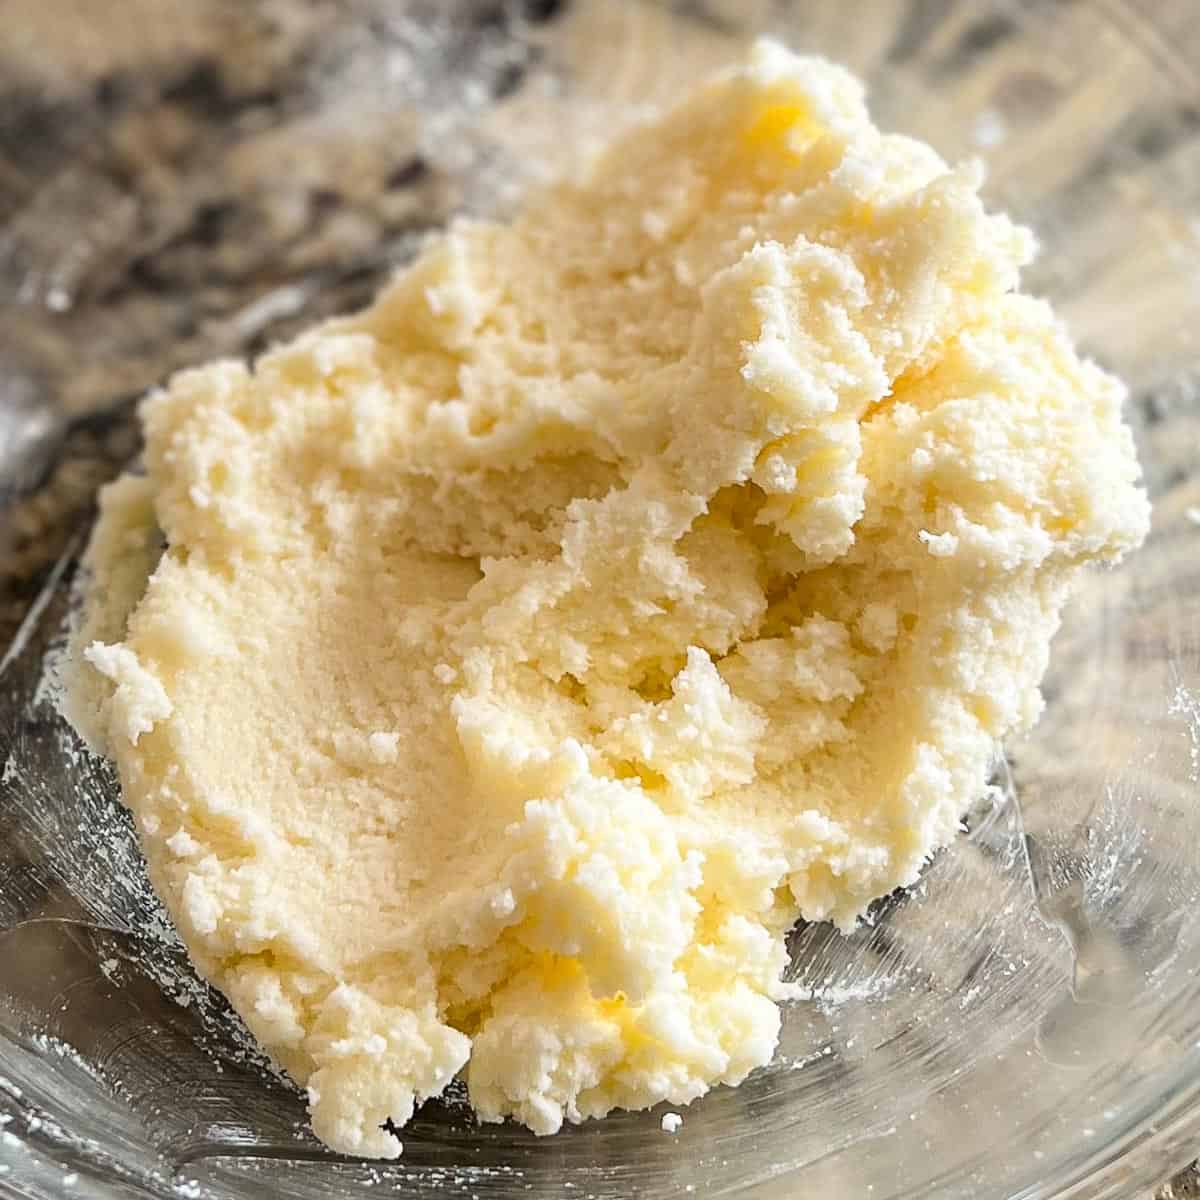 Creamed butter and sugar.